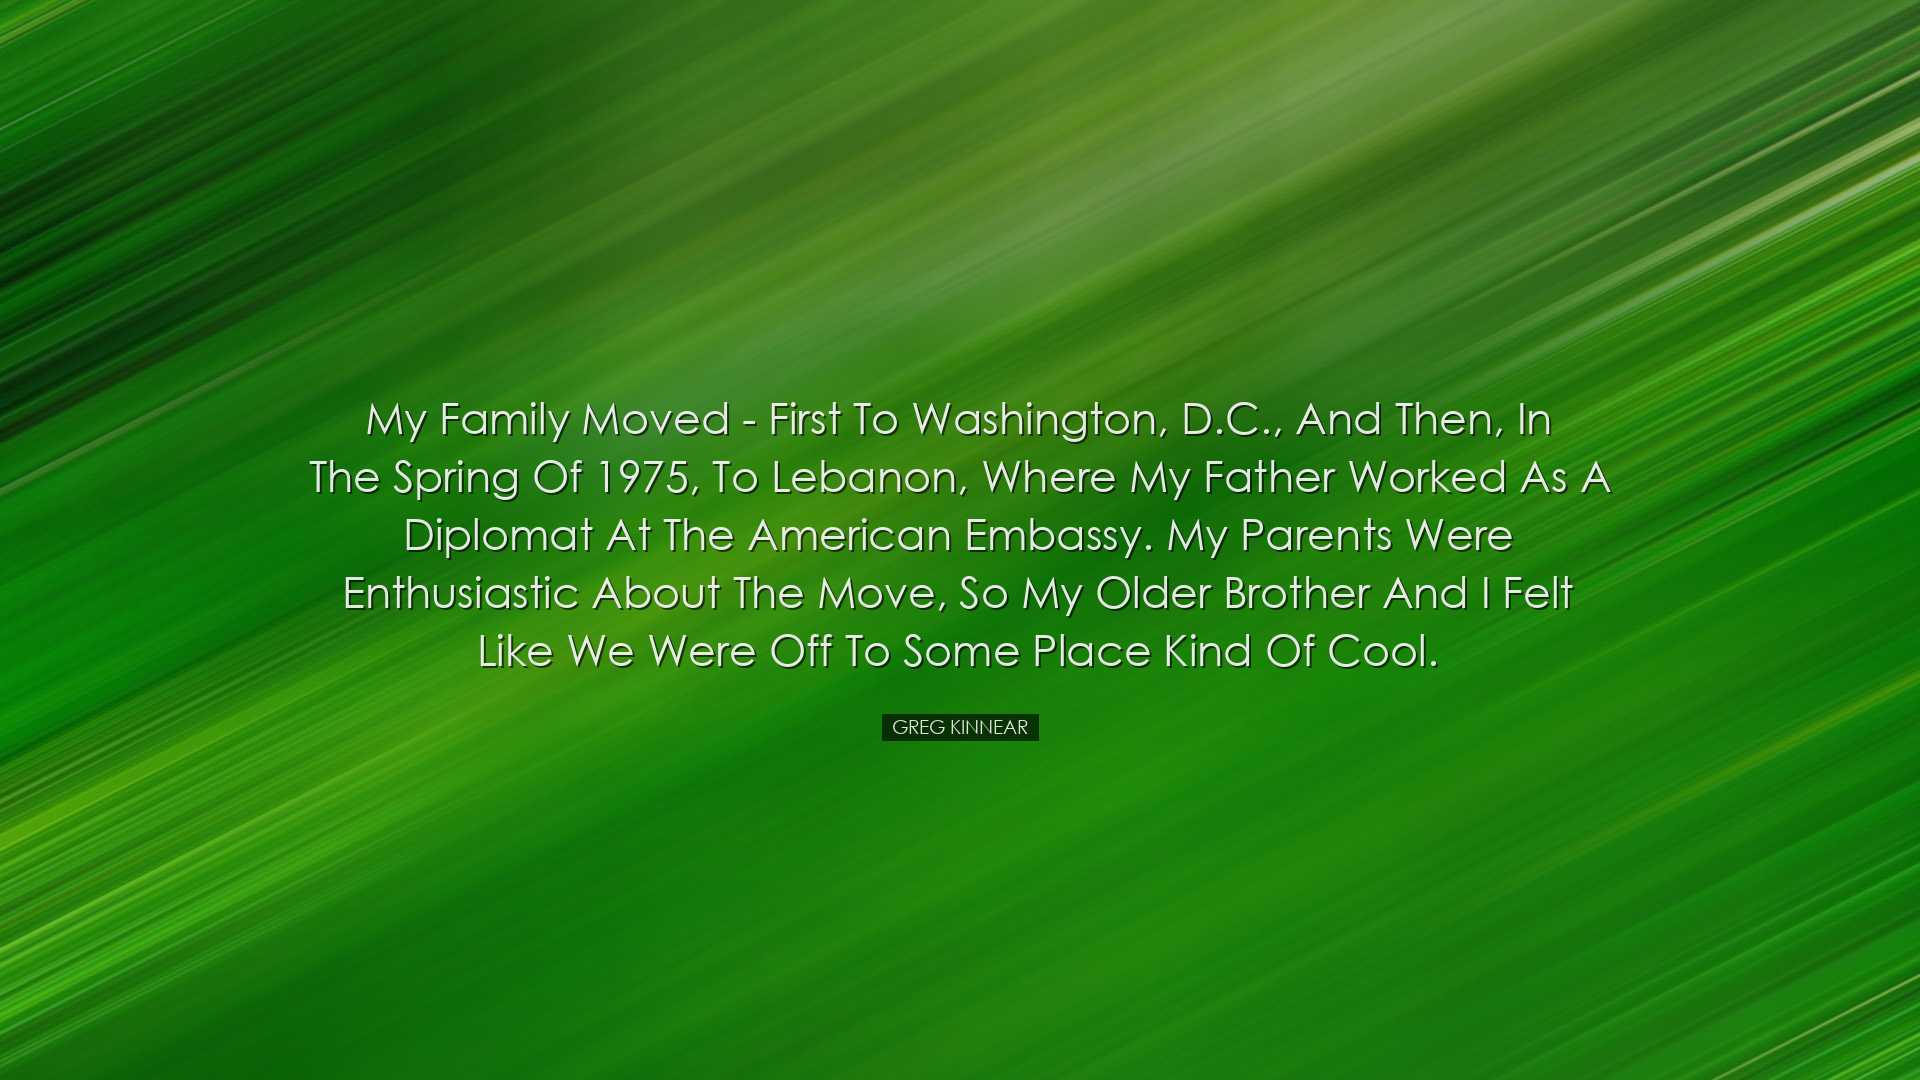 My family moved - first to Washington, D.C., and then, in the spri